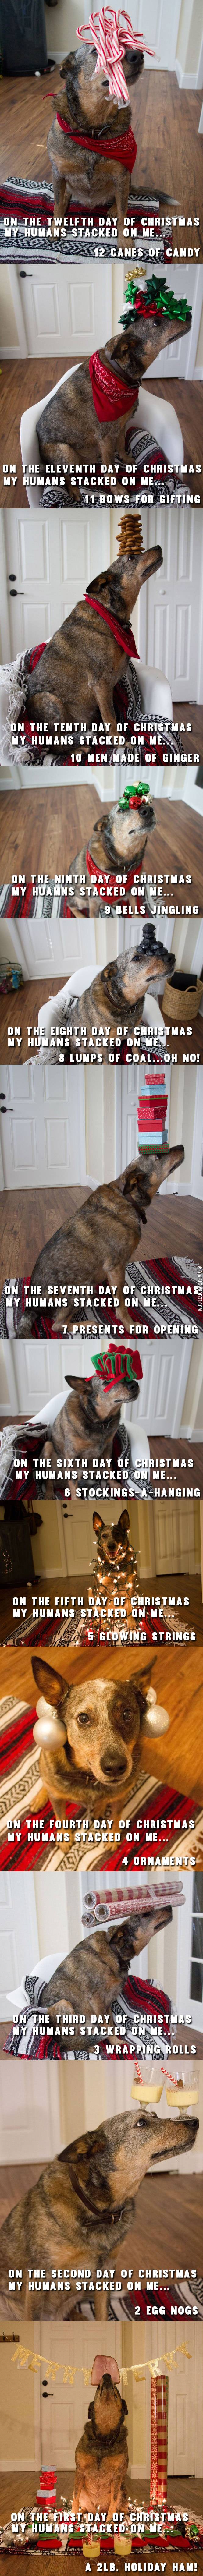 The+12+days+of+a+doggy+Christmas%21